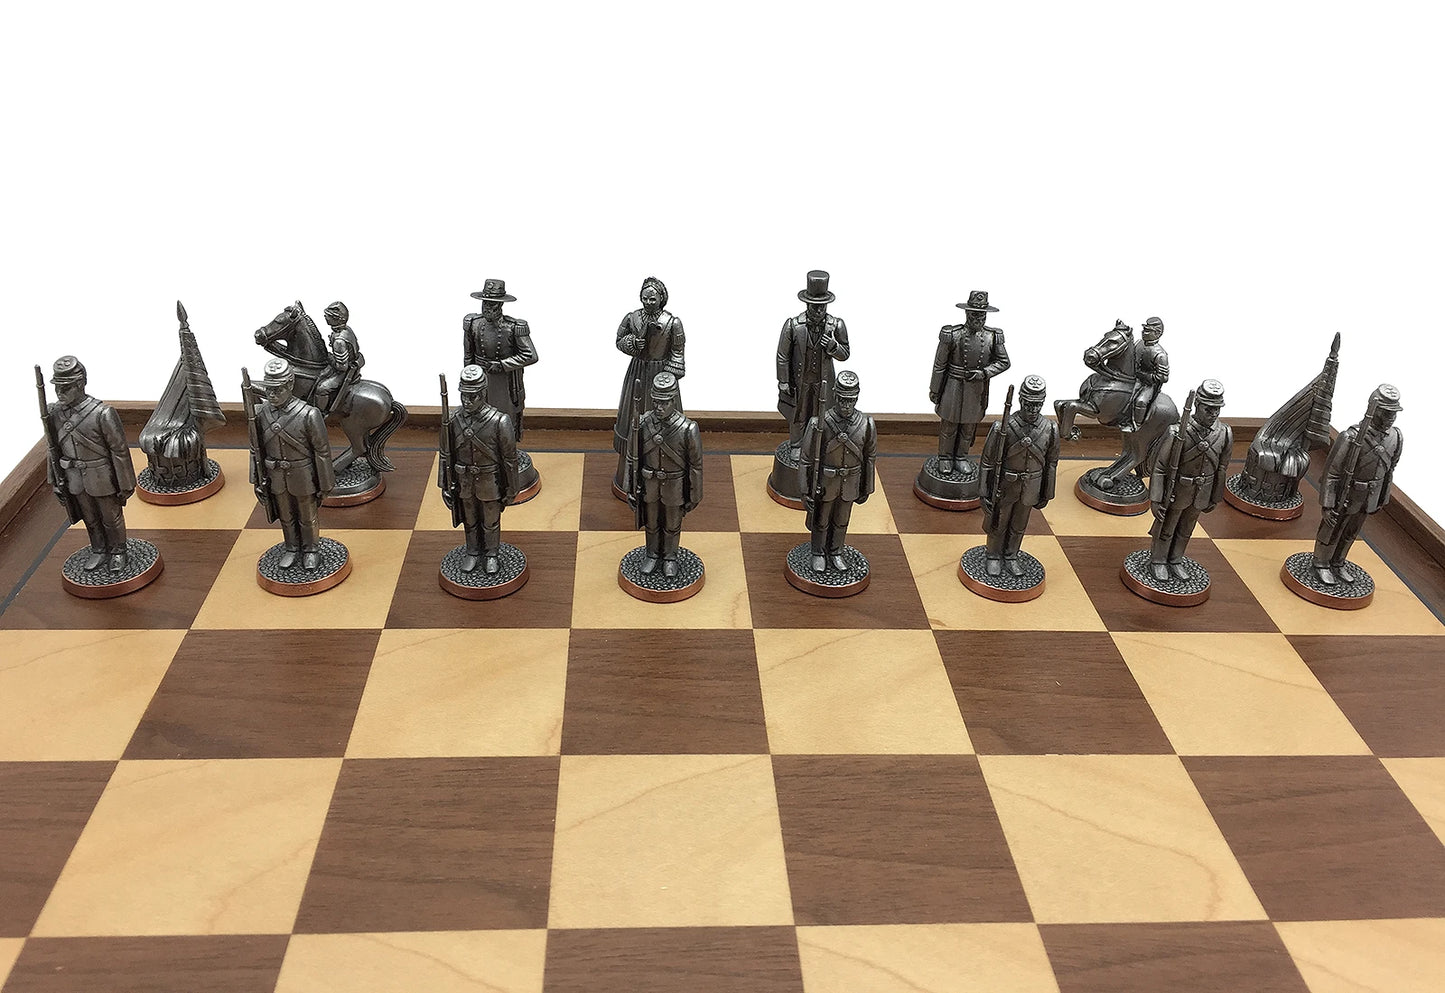 Toy soldier Antique finish. American Civil War Chess Set. Union troops.